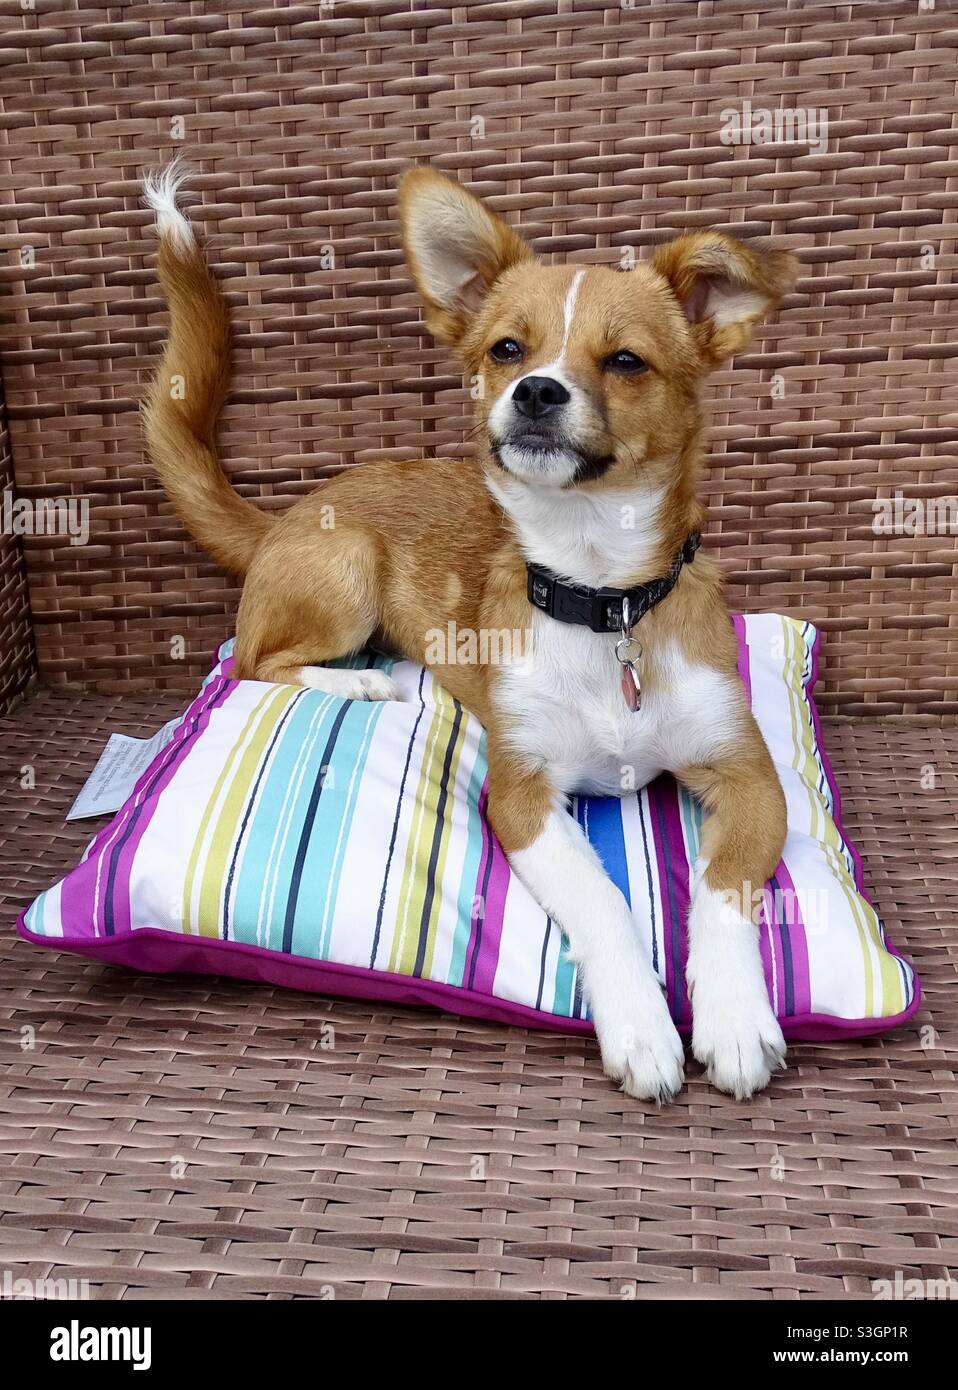 Puppy dog sitting on a colourful cushion in the summer sunshine Stock Photo